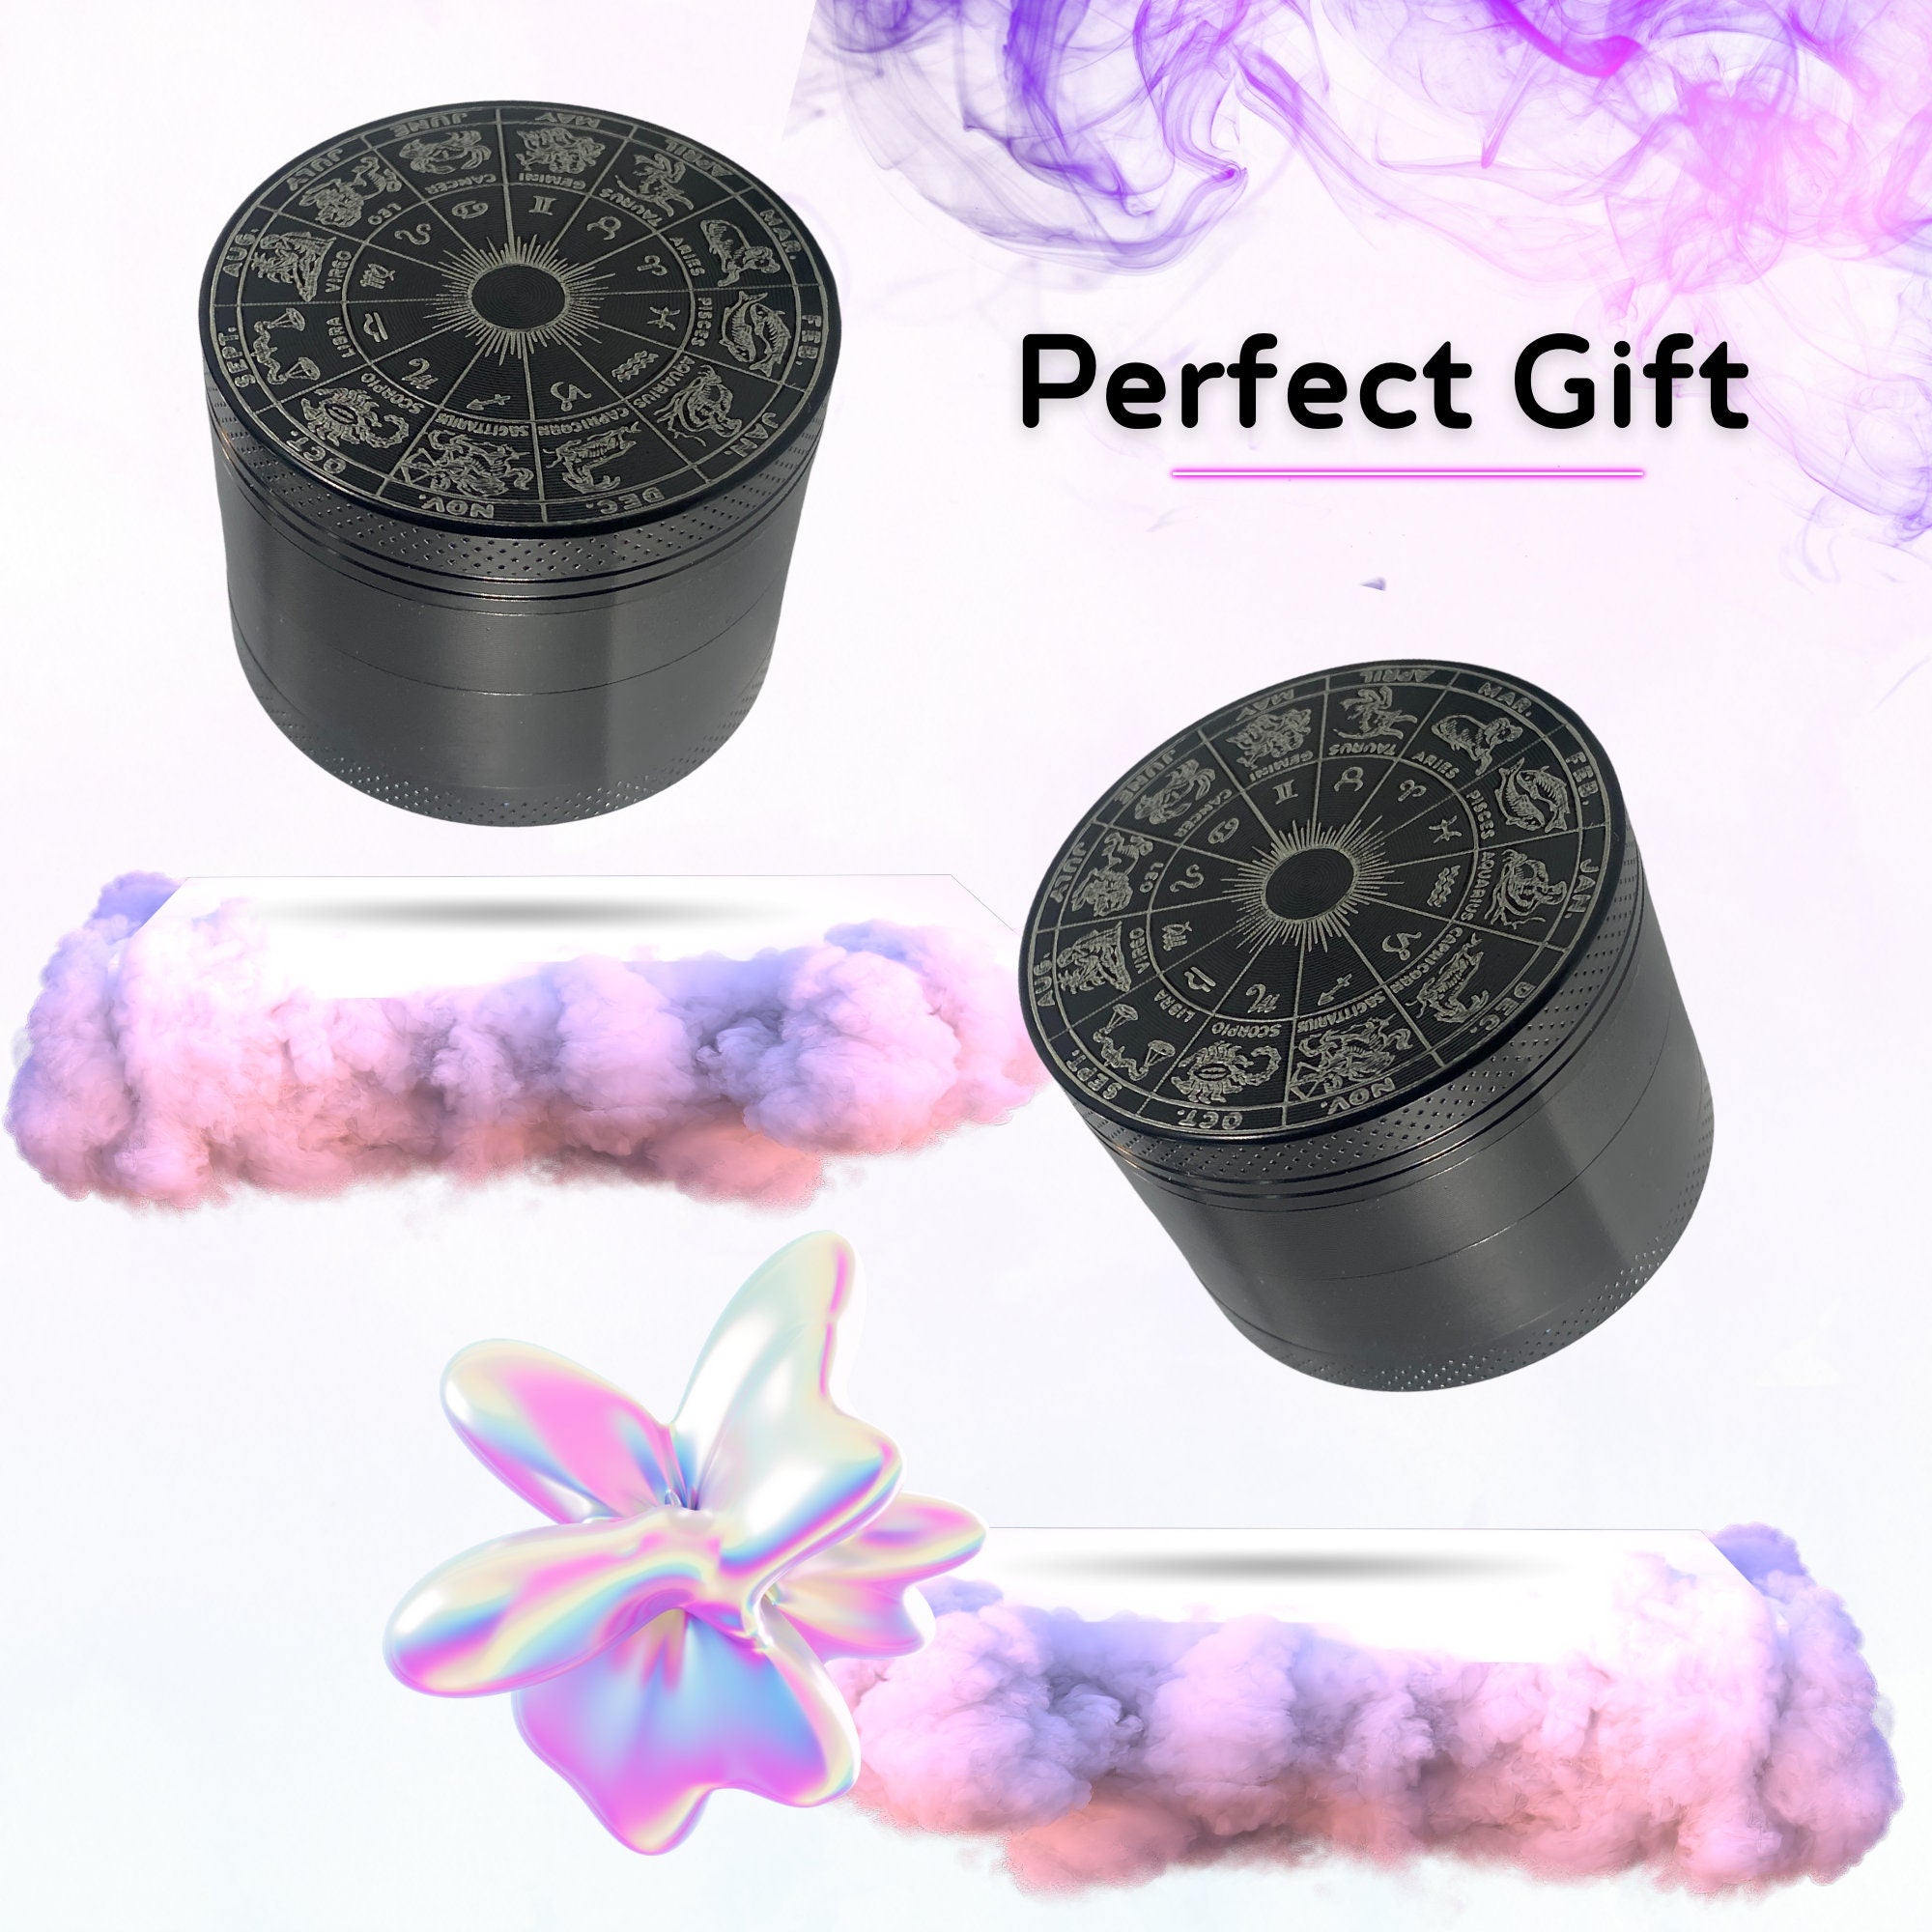 Astronomical Weed Grinder | cannabis grinders, weed accessories, astrology, metal grinder, cannabis, Space Psychedelic Trippy Herb Girly